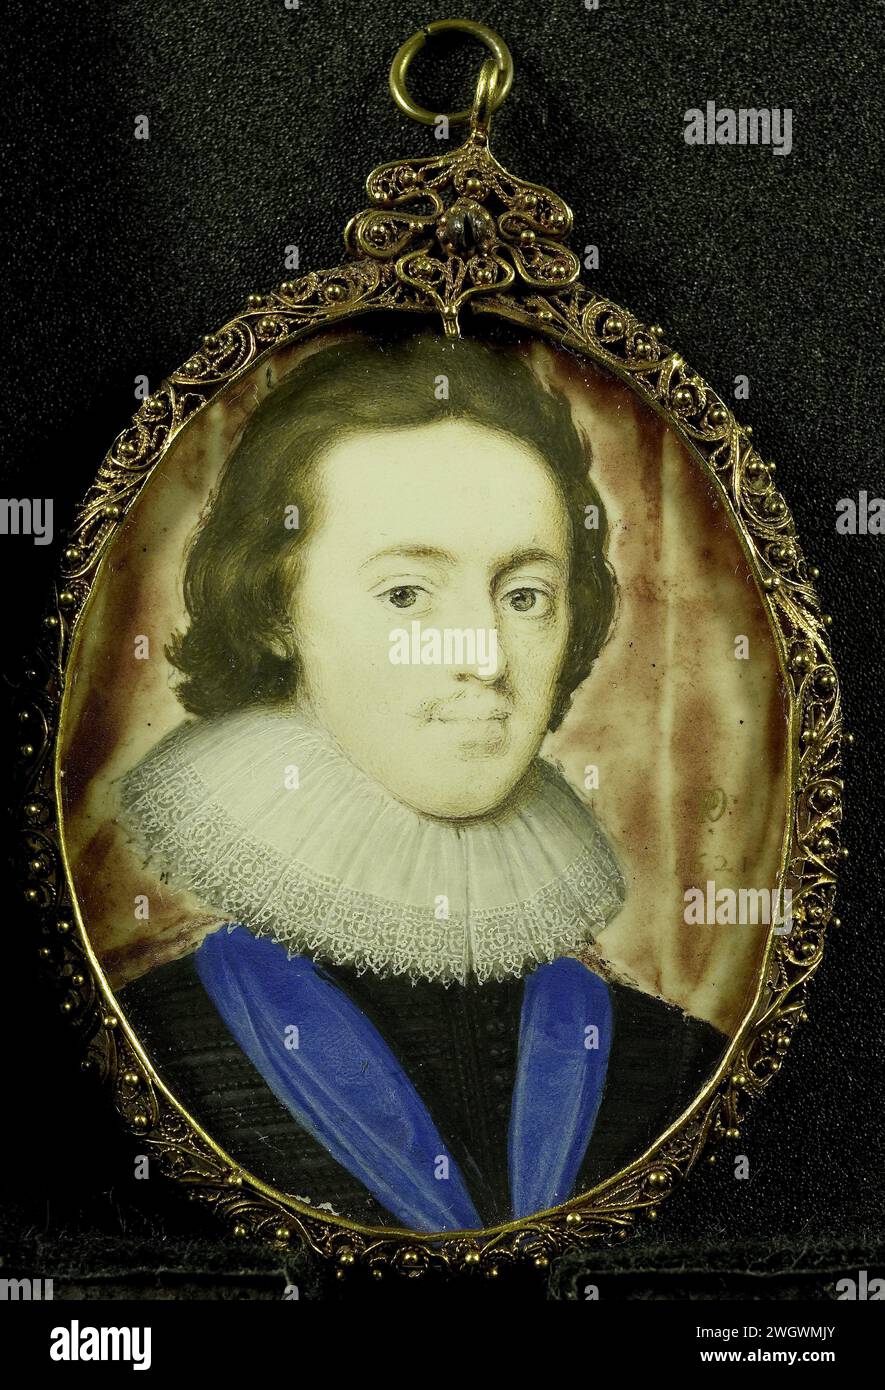 Karel Stuart (1600-49), Prince of Wales. The later King Charles I of England, Peter Oliver, 1621 miniature (painting) Portrait of Karel Stuart (1600-49), Prince of Wales. The later King Charles I of England. Bust, to the right. Part of the portrait miniatures collection.  parchment (animal material). gold (metal). glass Stock Photo